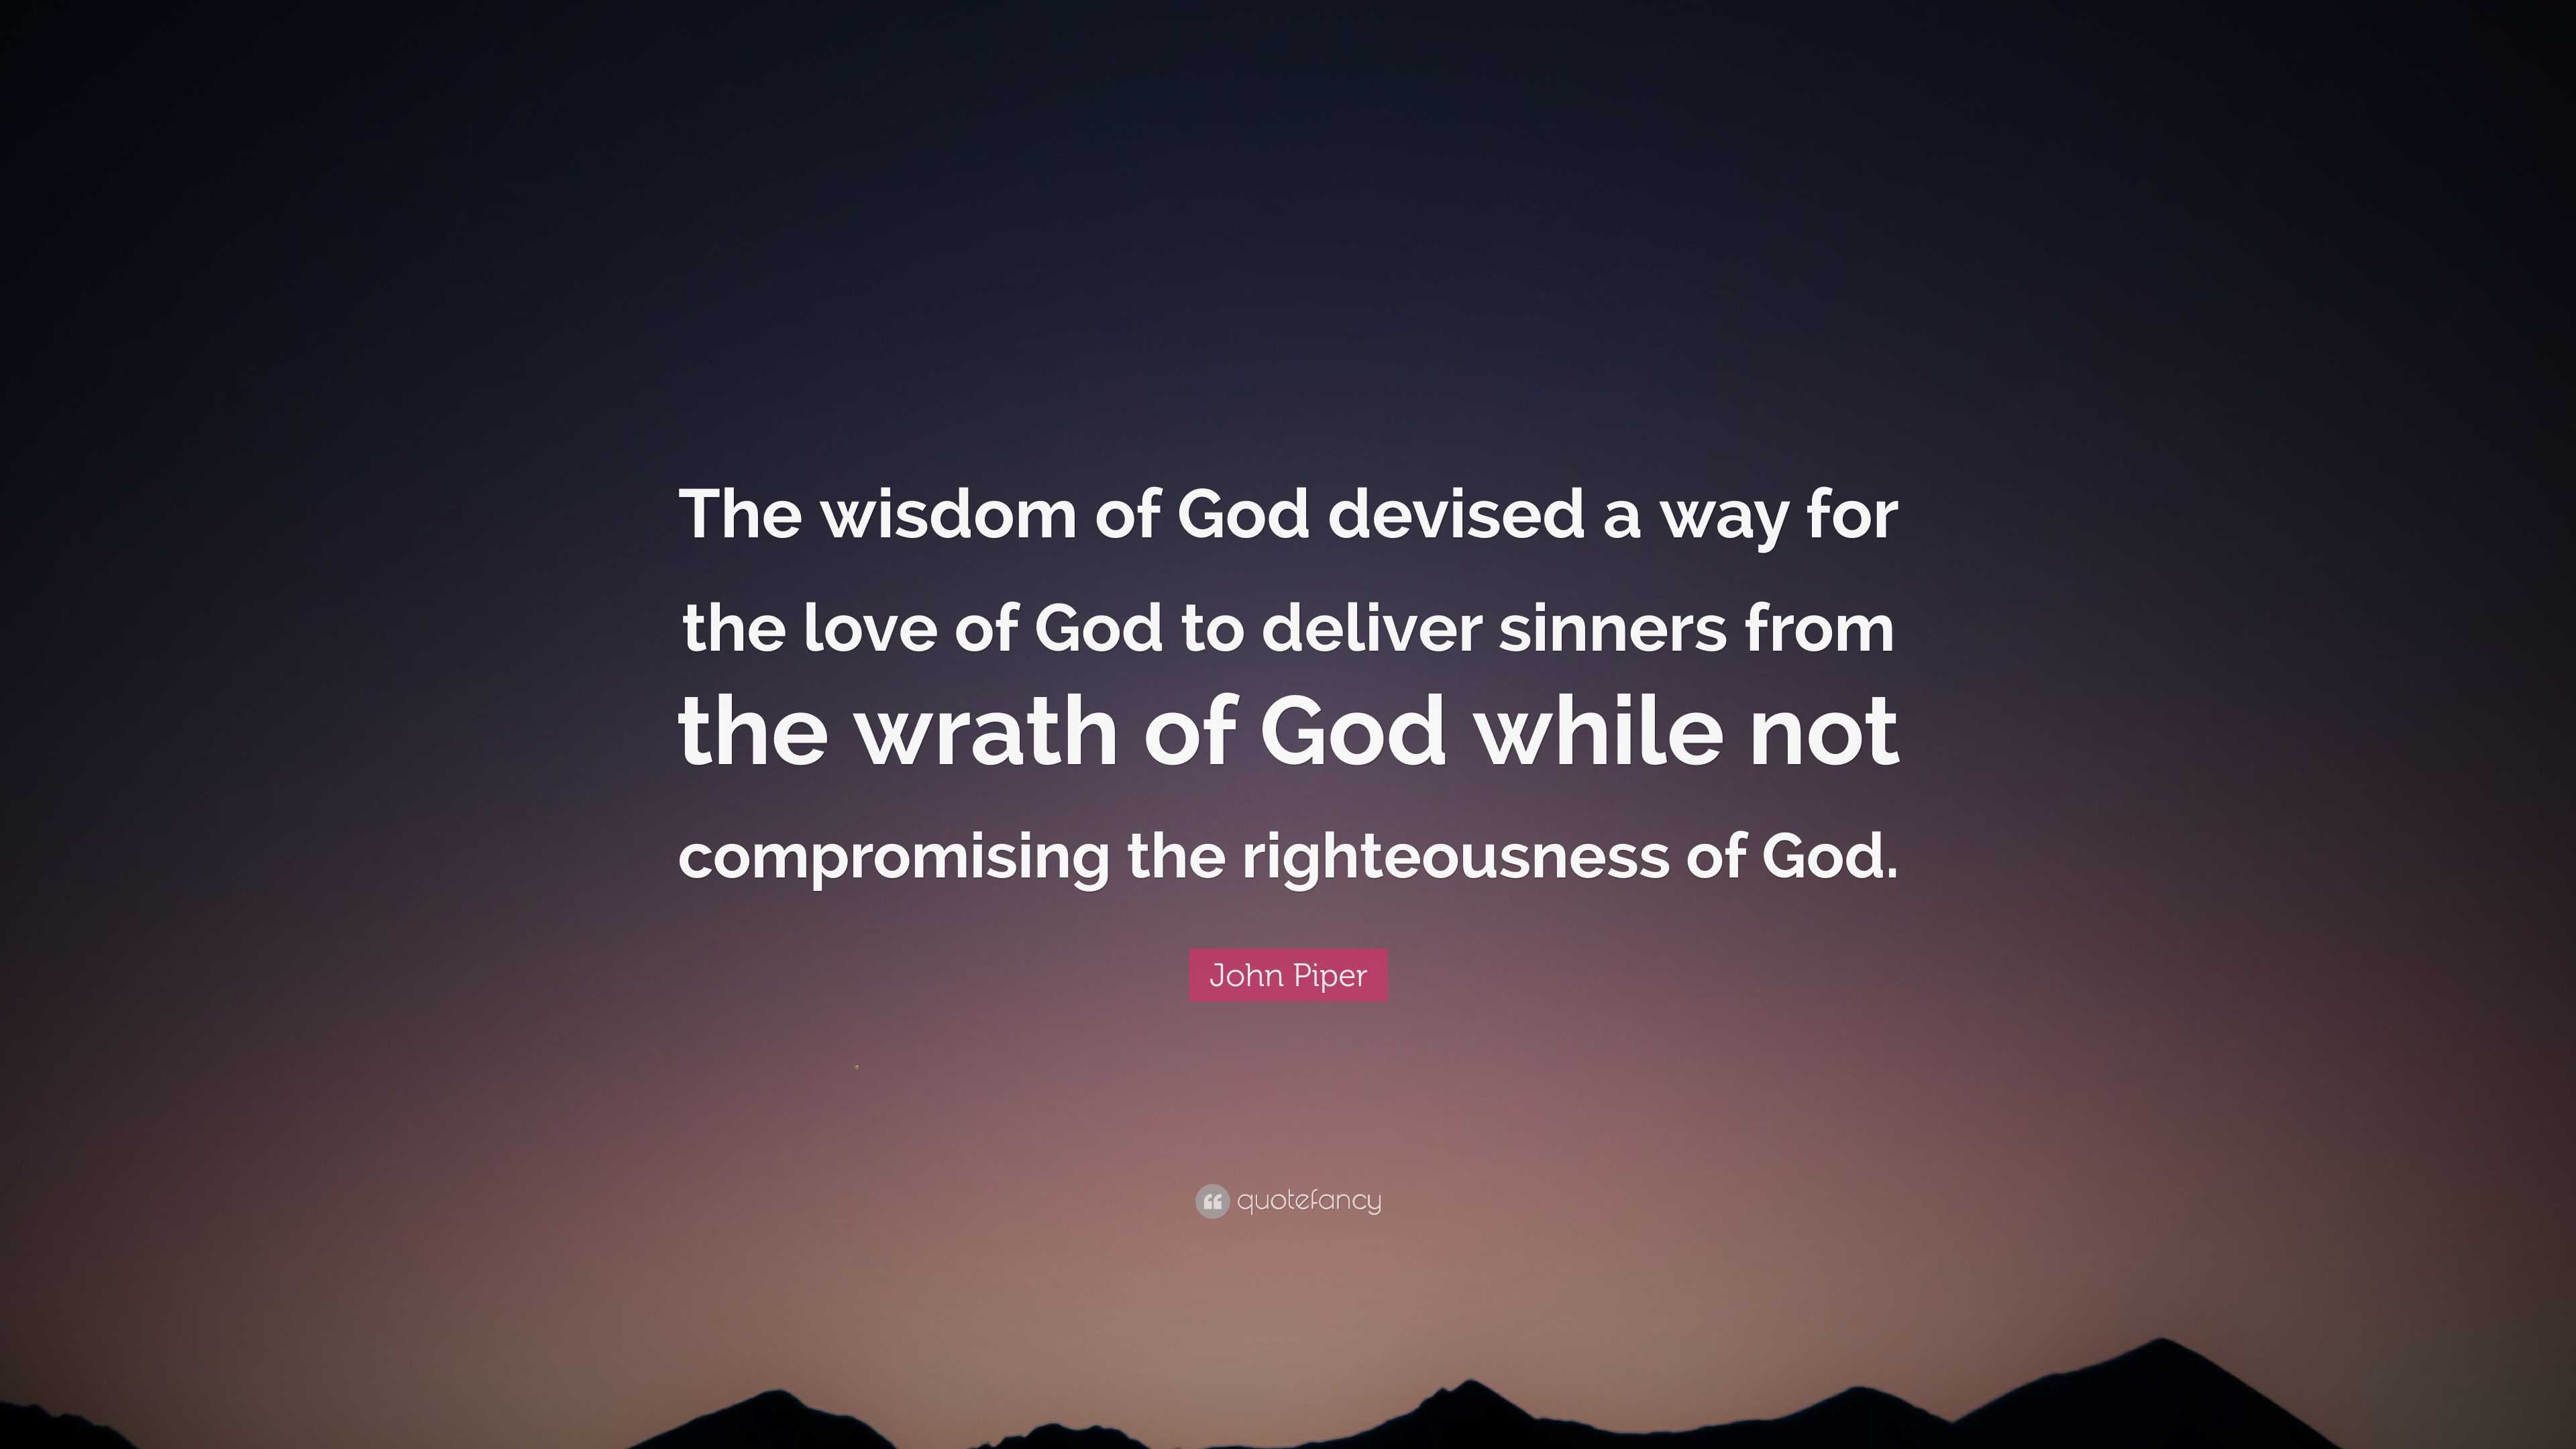 John Piper Quote “The wisdom of God devised a way for the love of